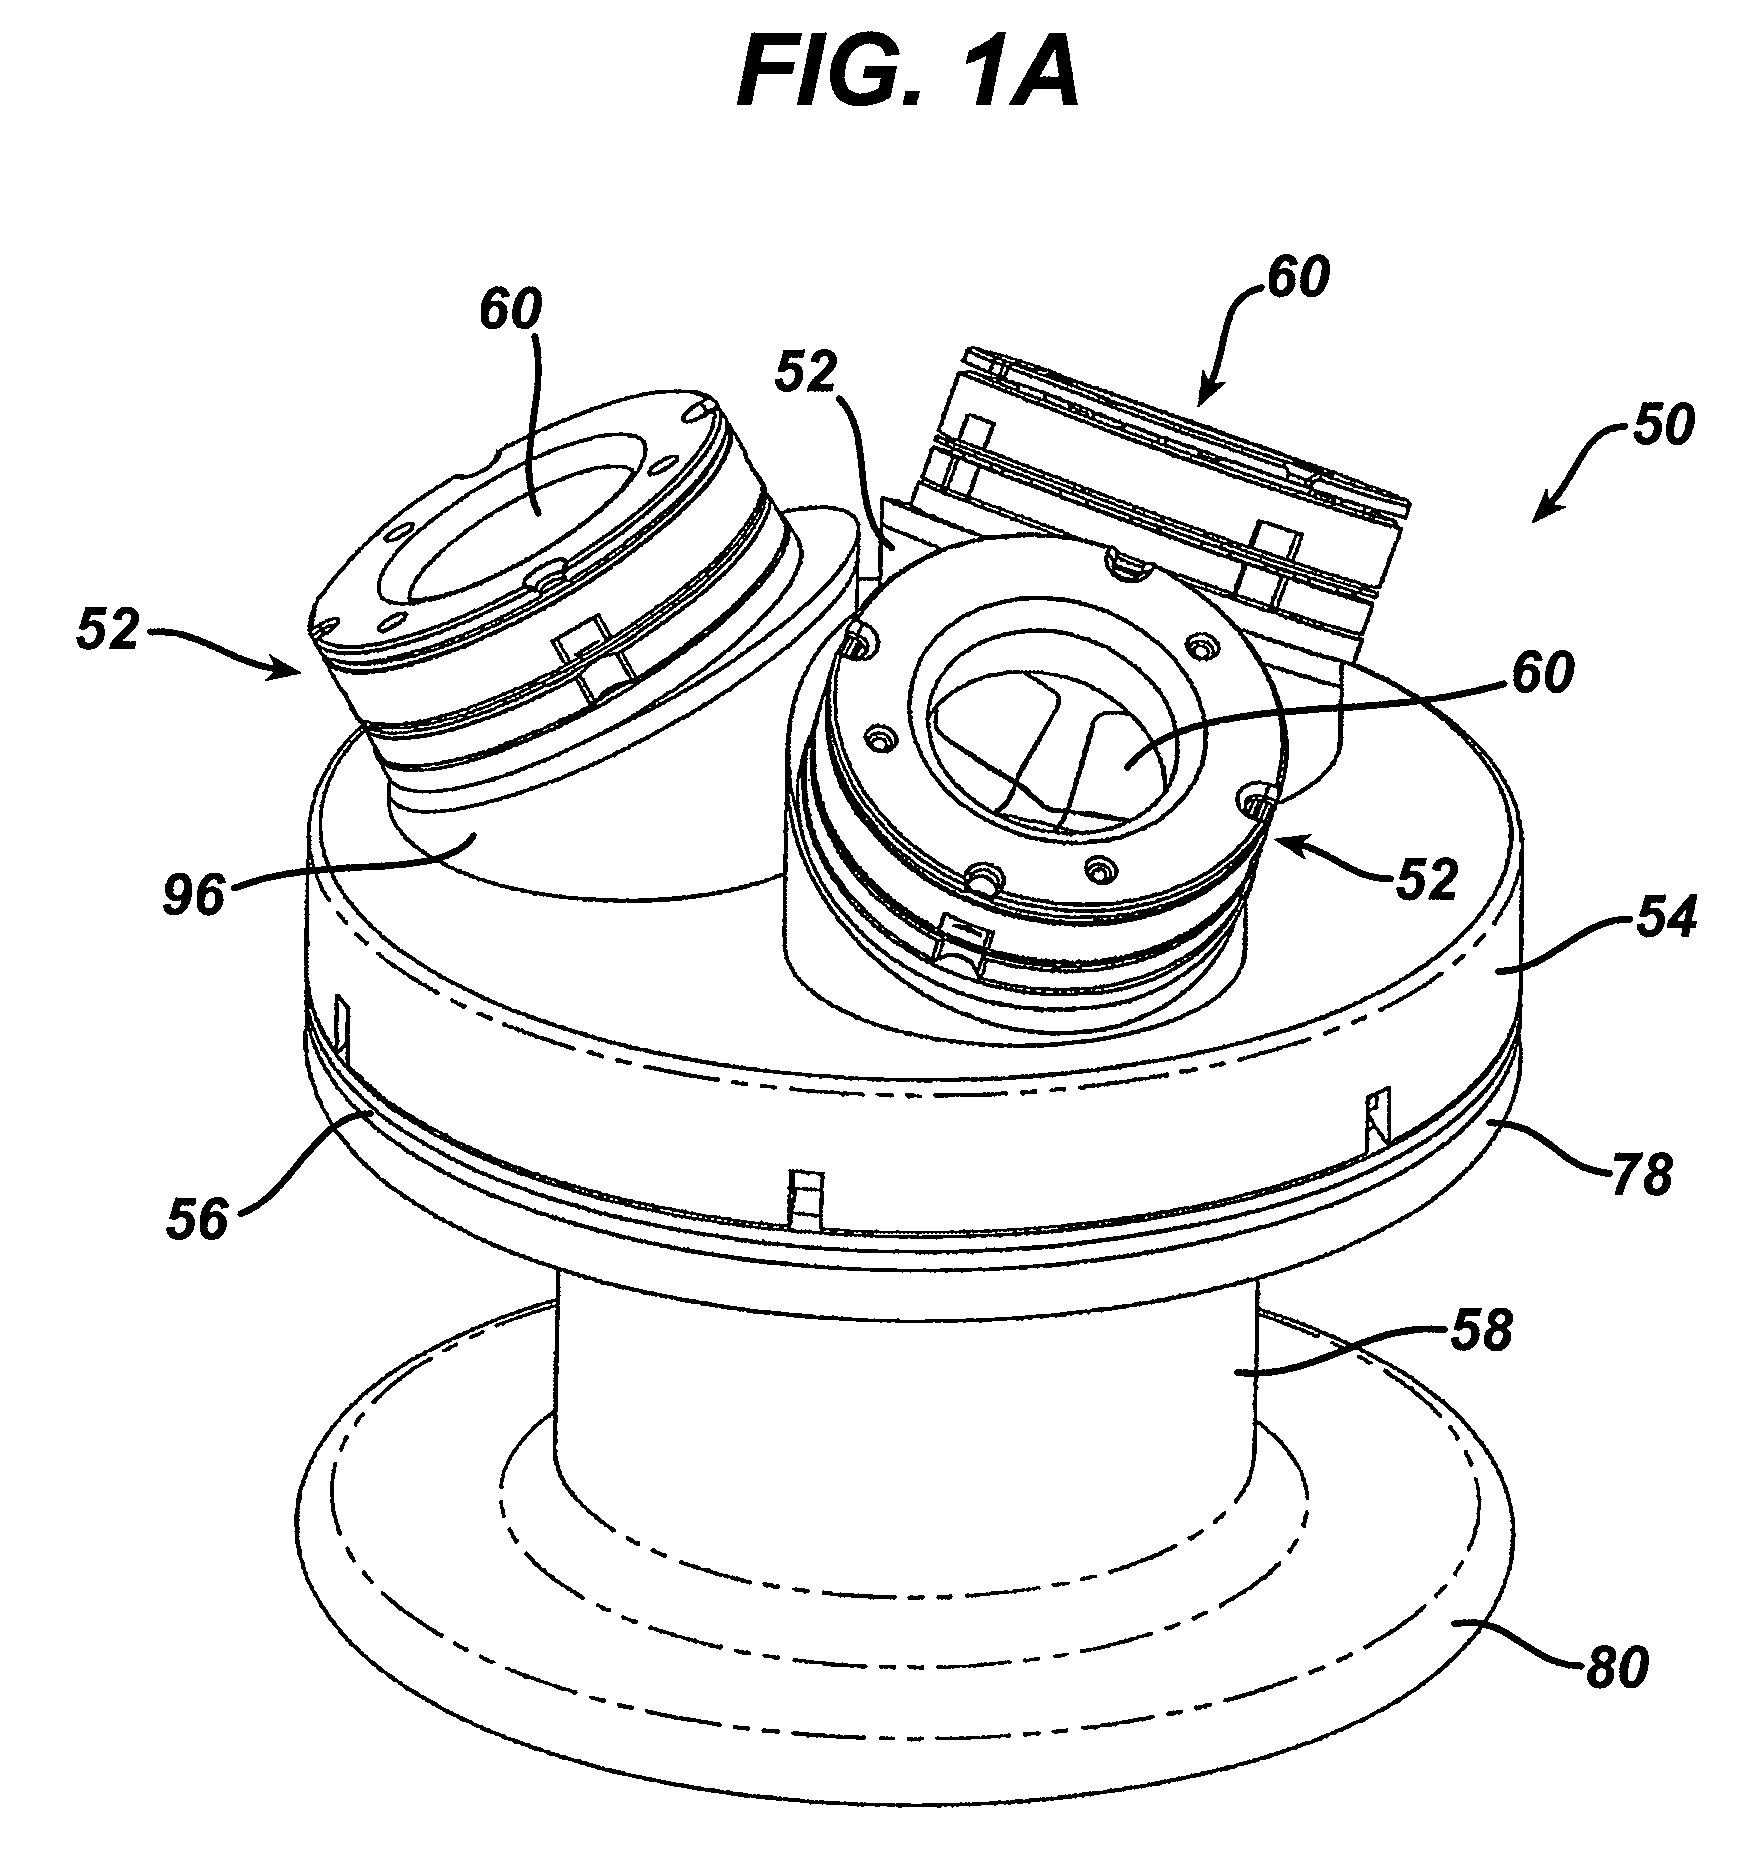 Surgical Access Device